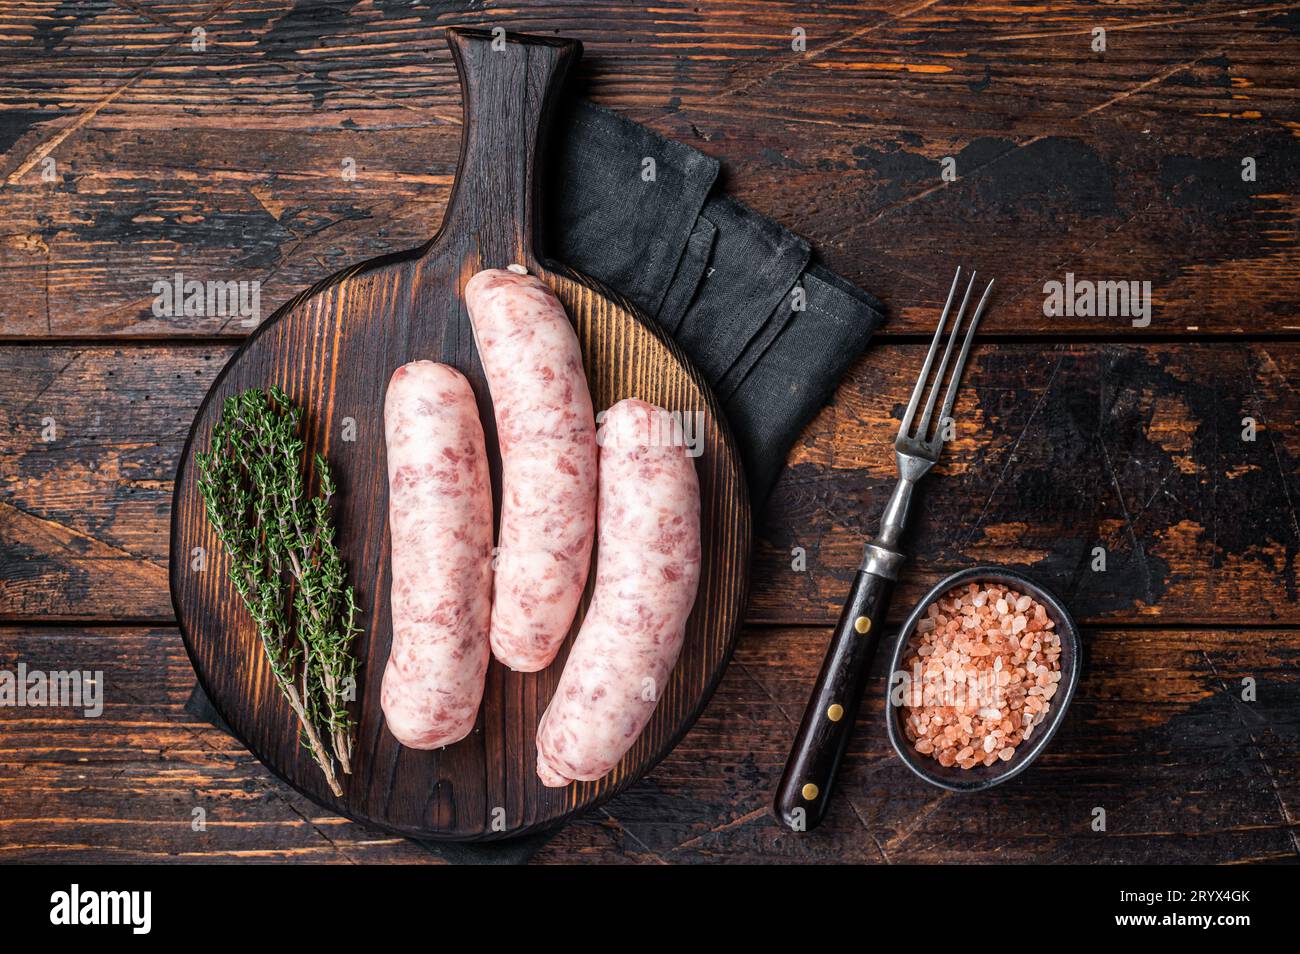 Fresh Raw Bratwurst meat sausages ready for cooking on wooden board. Wooden background. Top view. Stock Photo